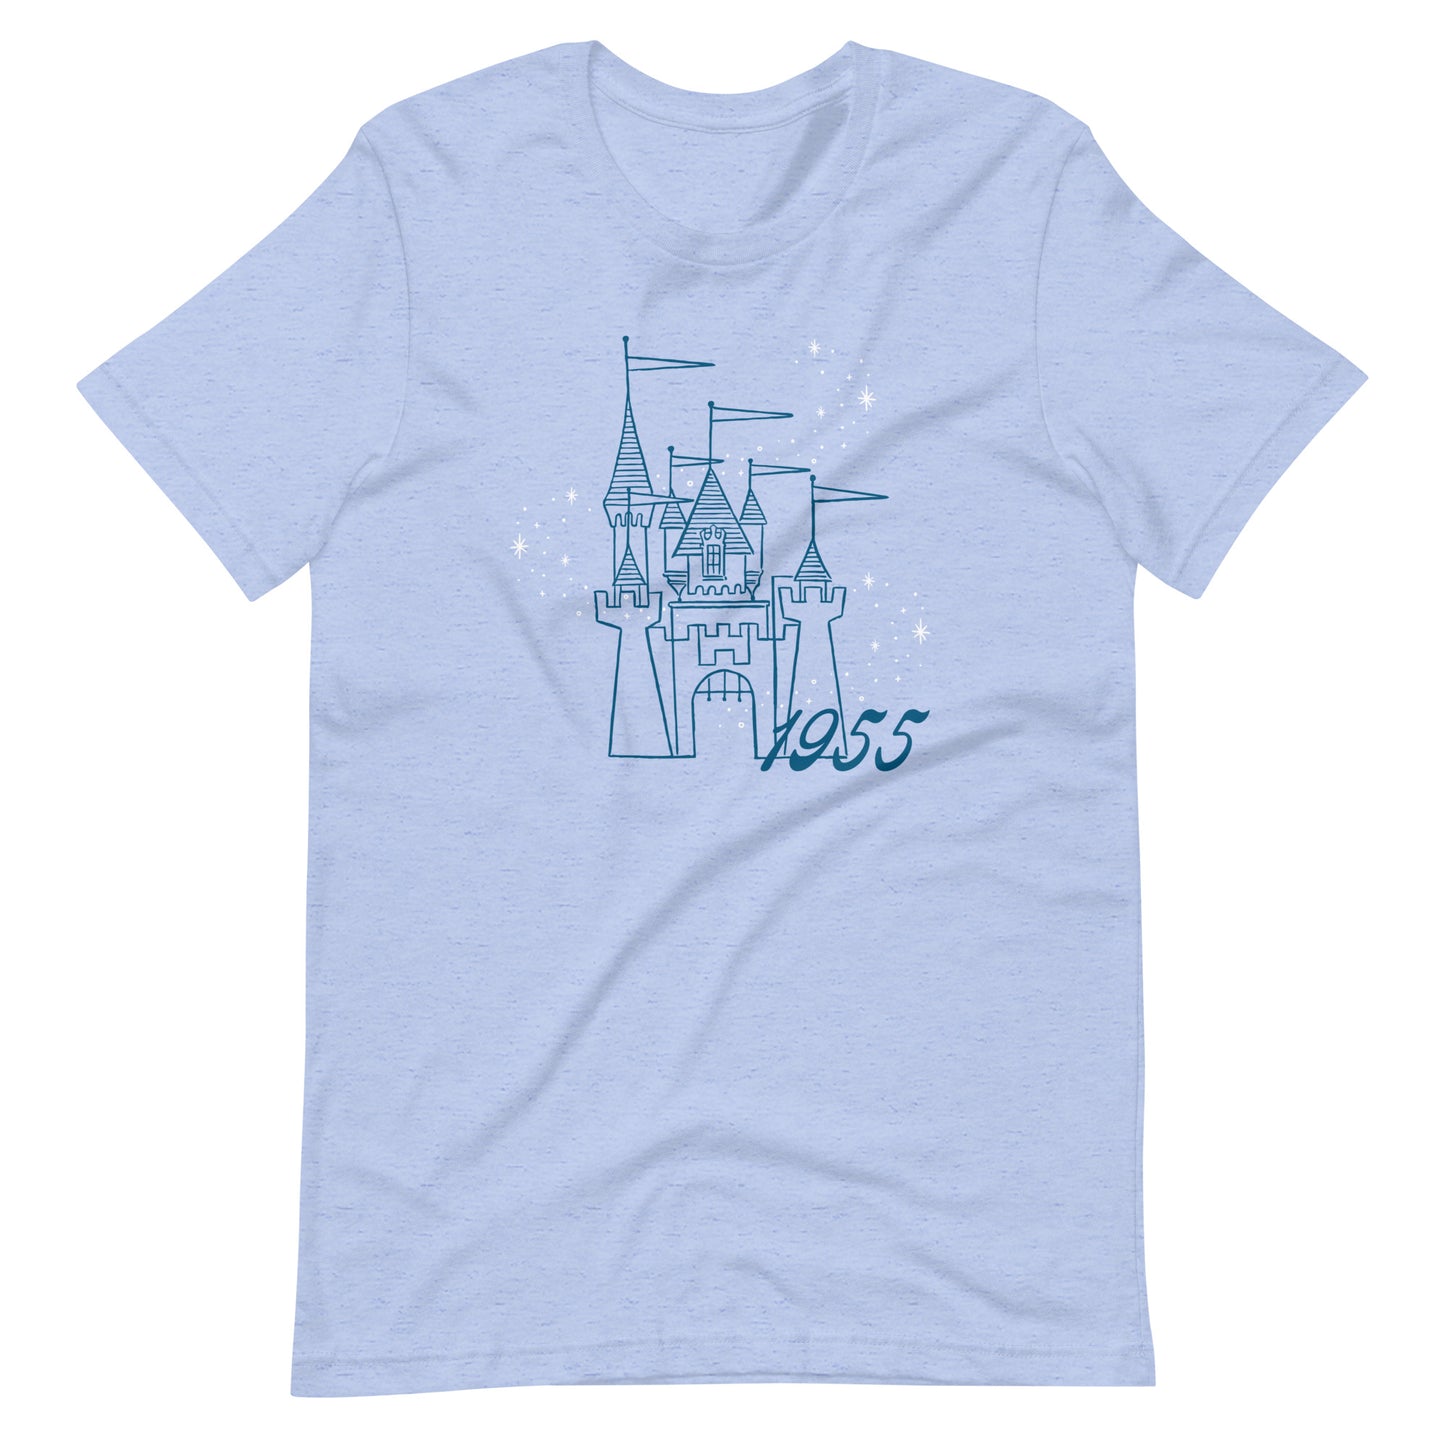 Blue t-shirt printed with vintage style sketch of the Disneyland Castle with the year 1955 and pixie dust above the castle.